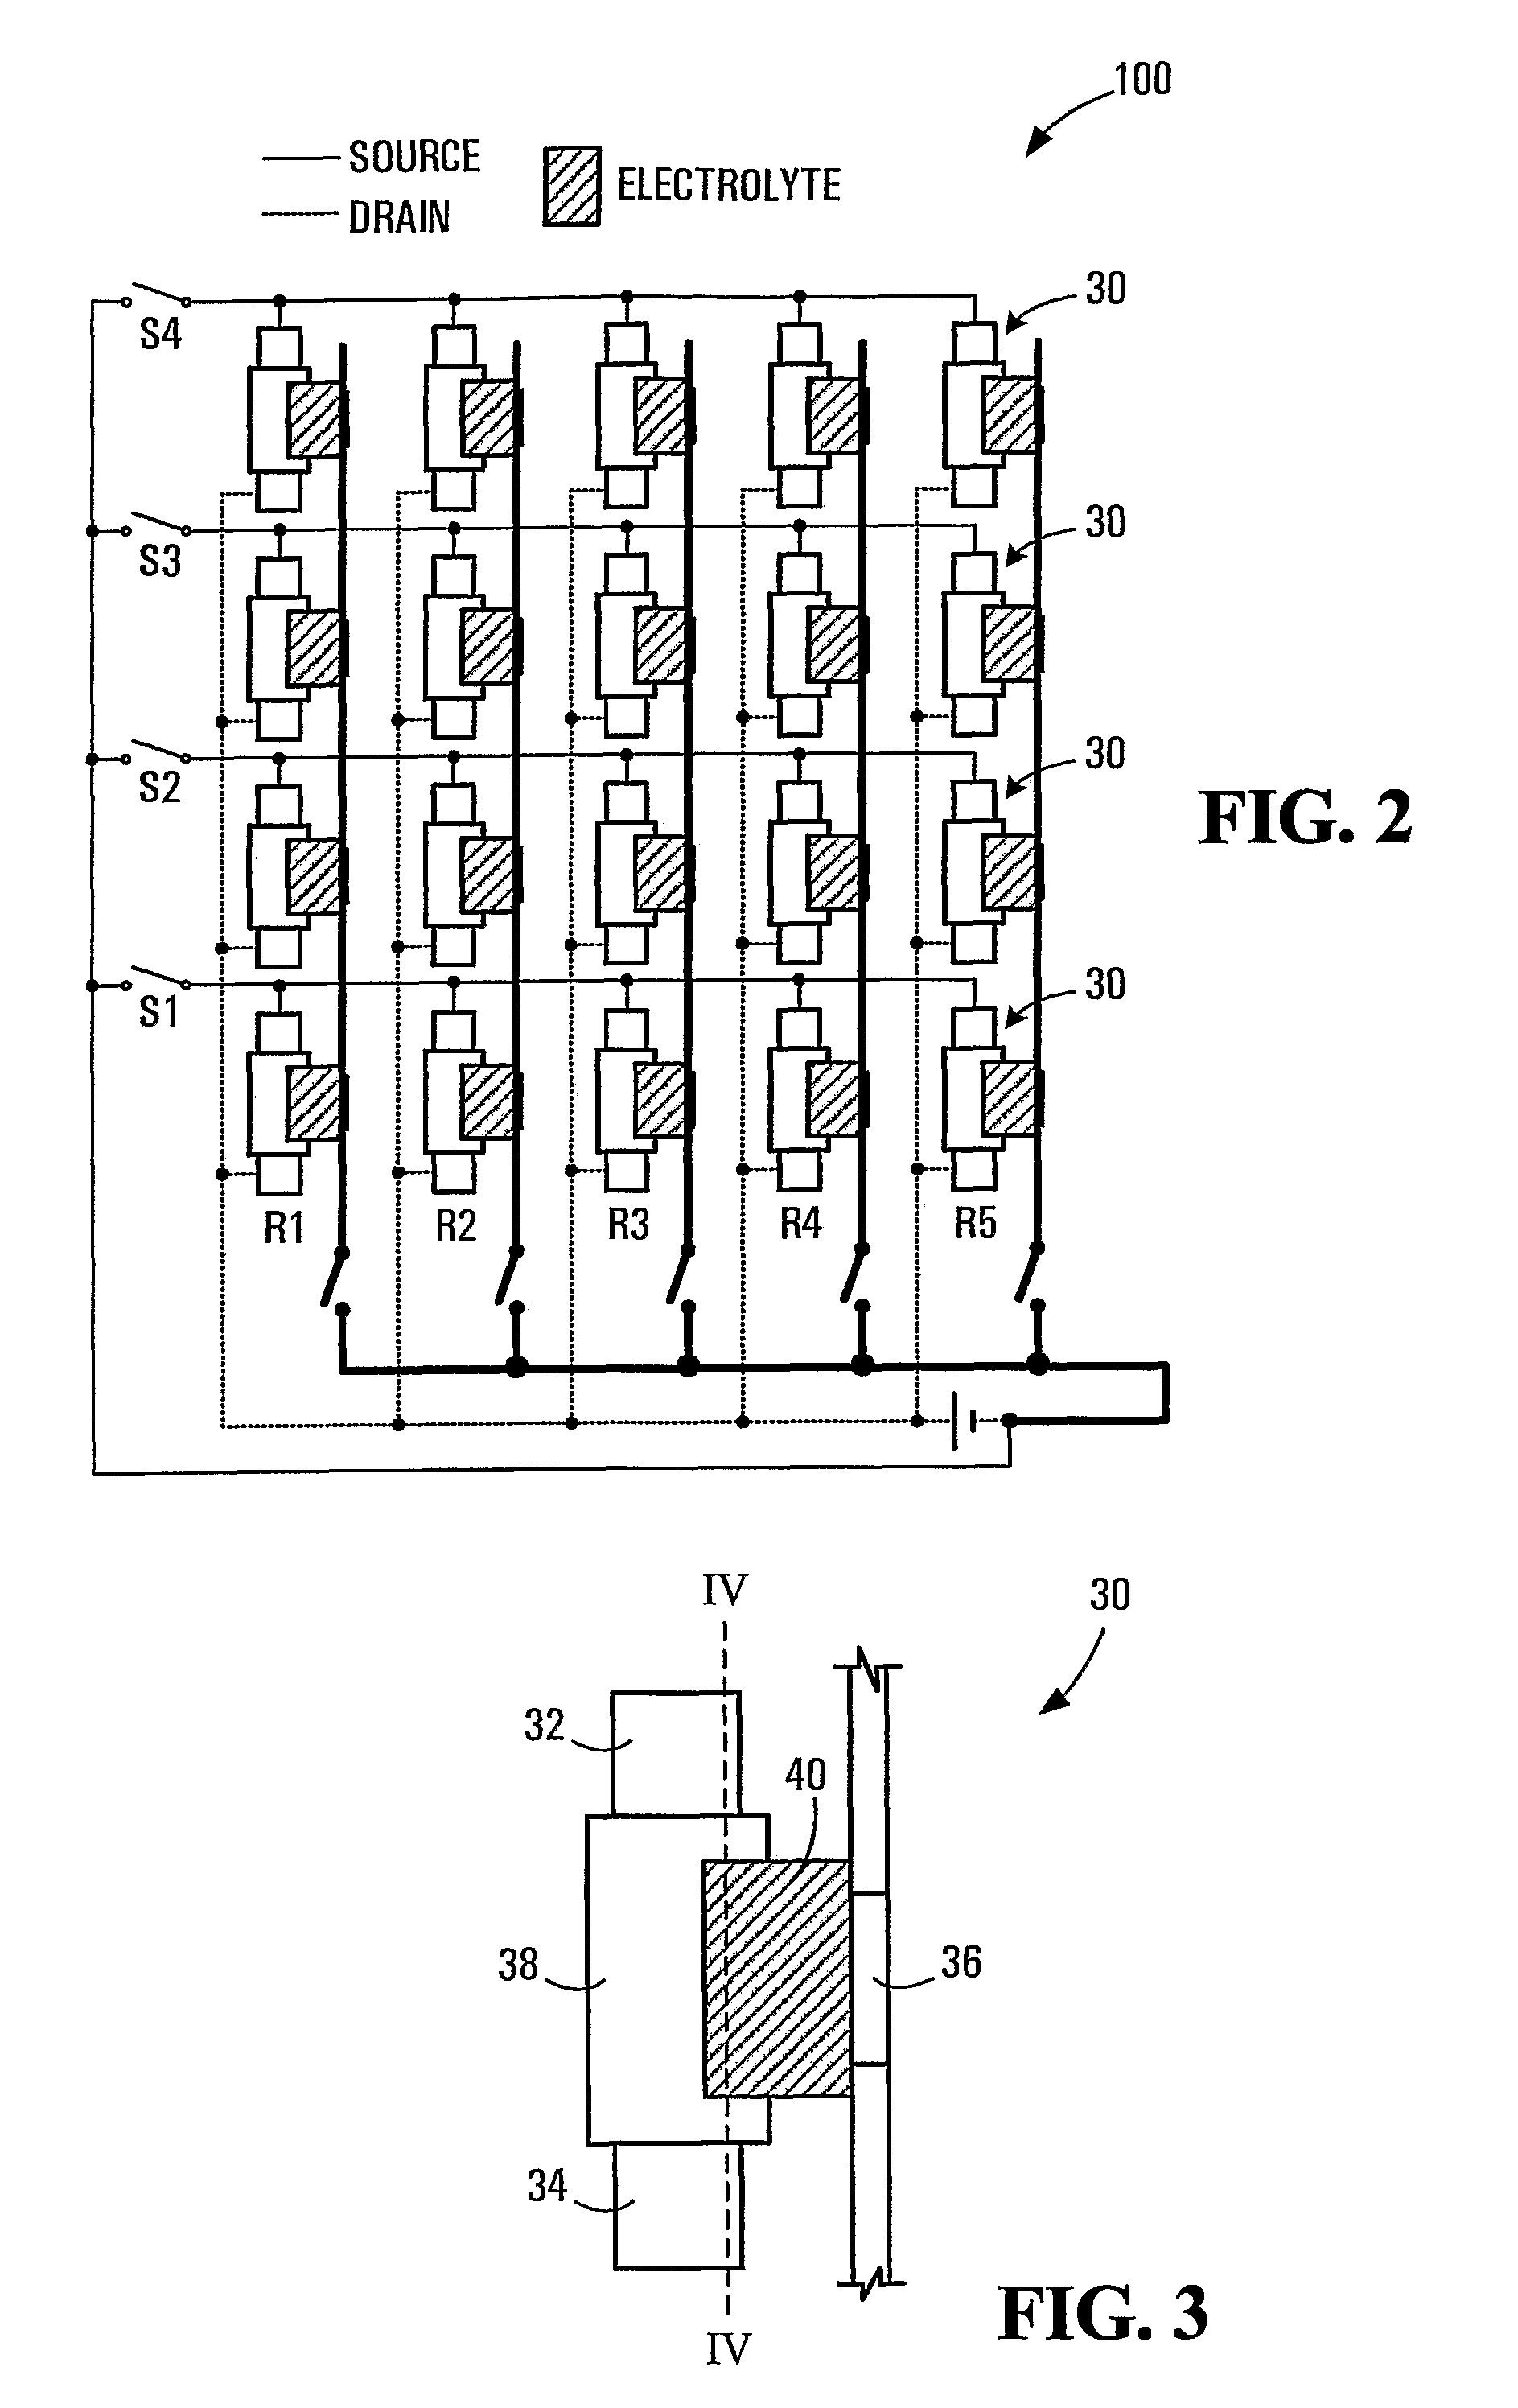 Addressable transistor chip for conducting assays